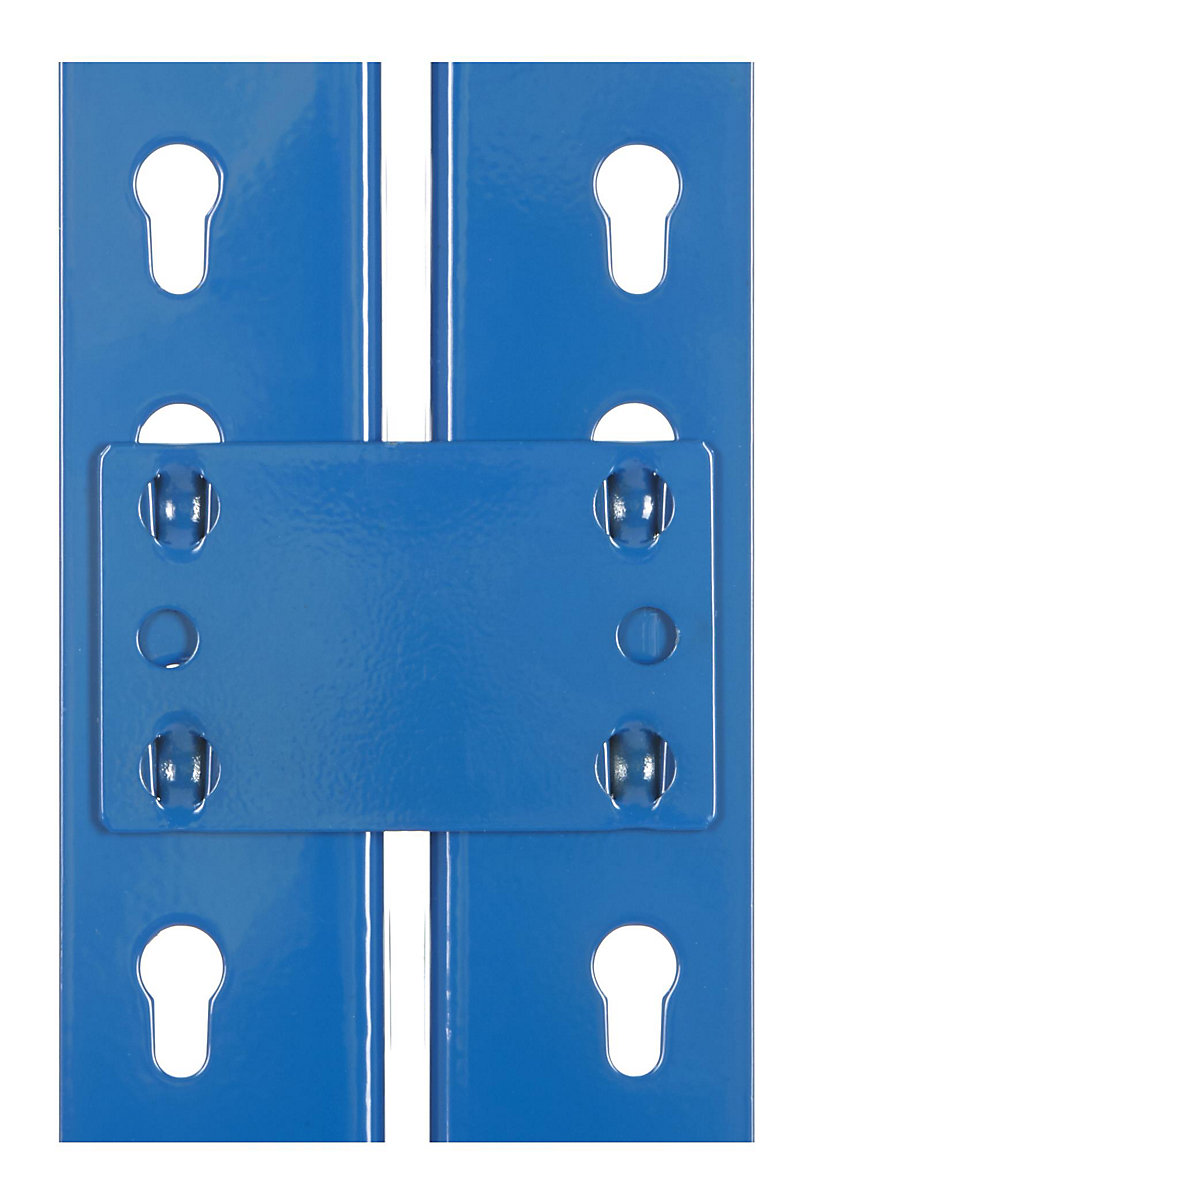 Tie plates for racking with 800 kg maximum load